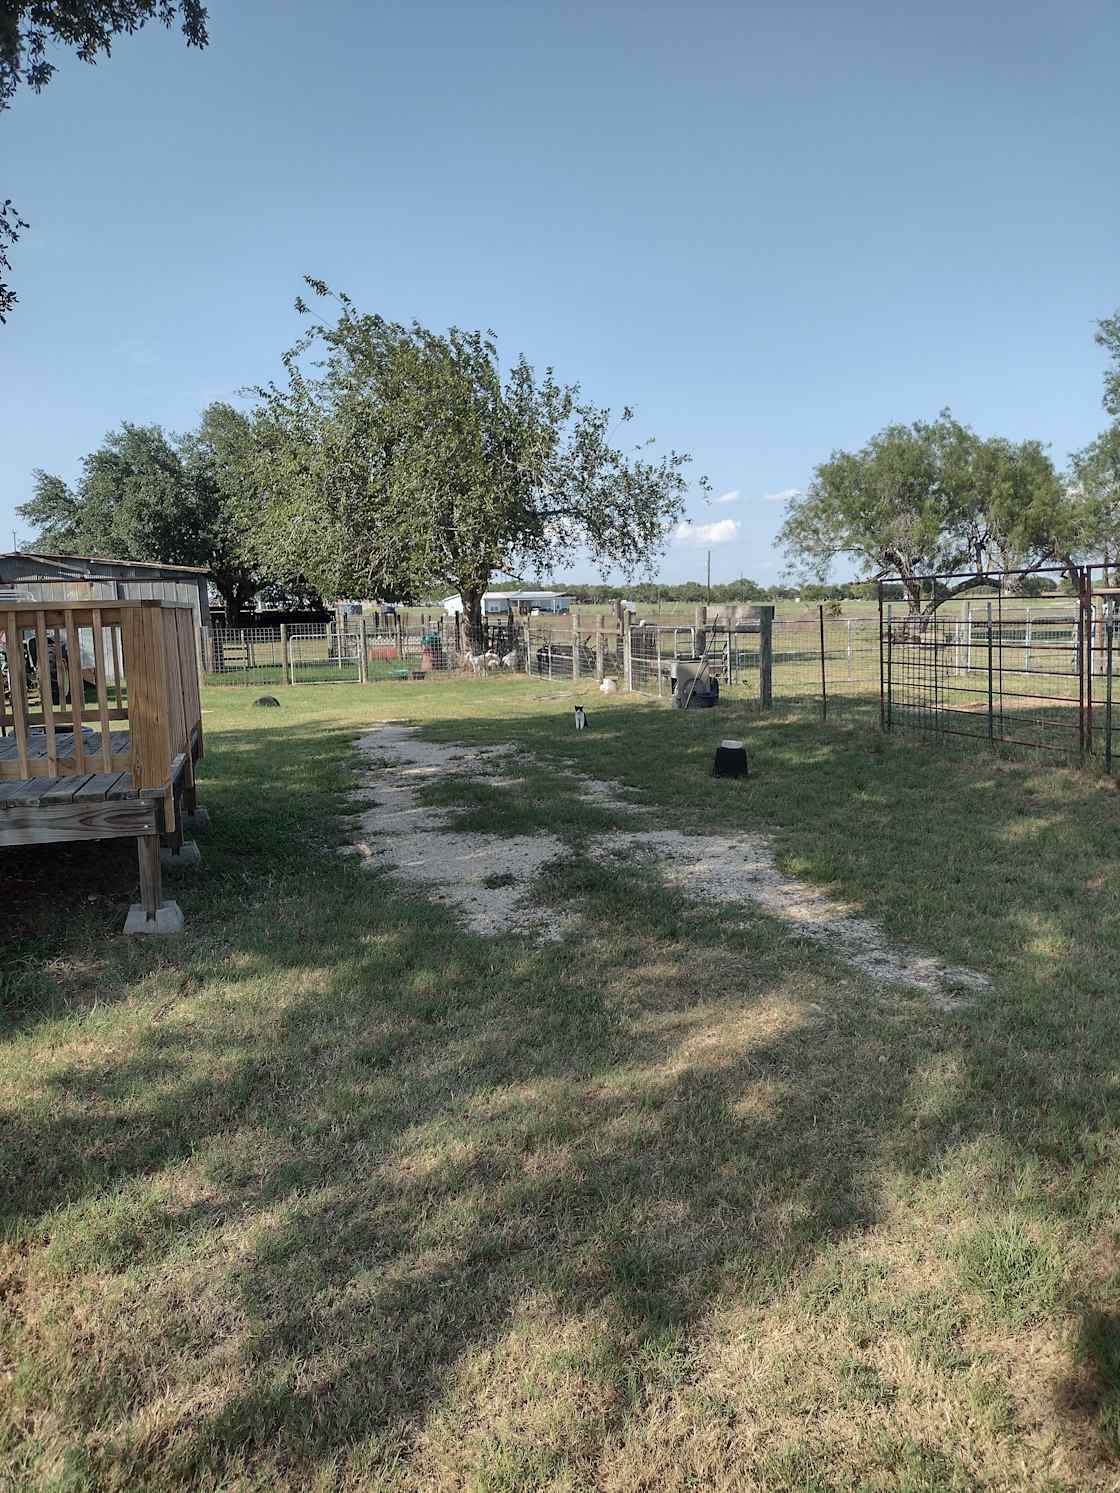 Ranch land with pasture.